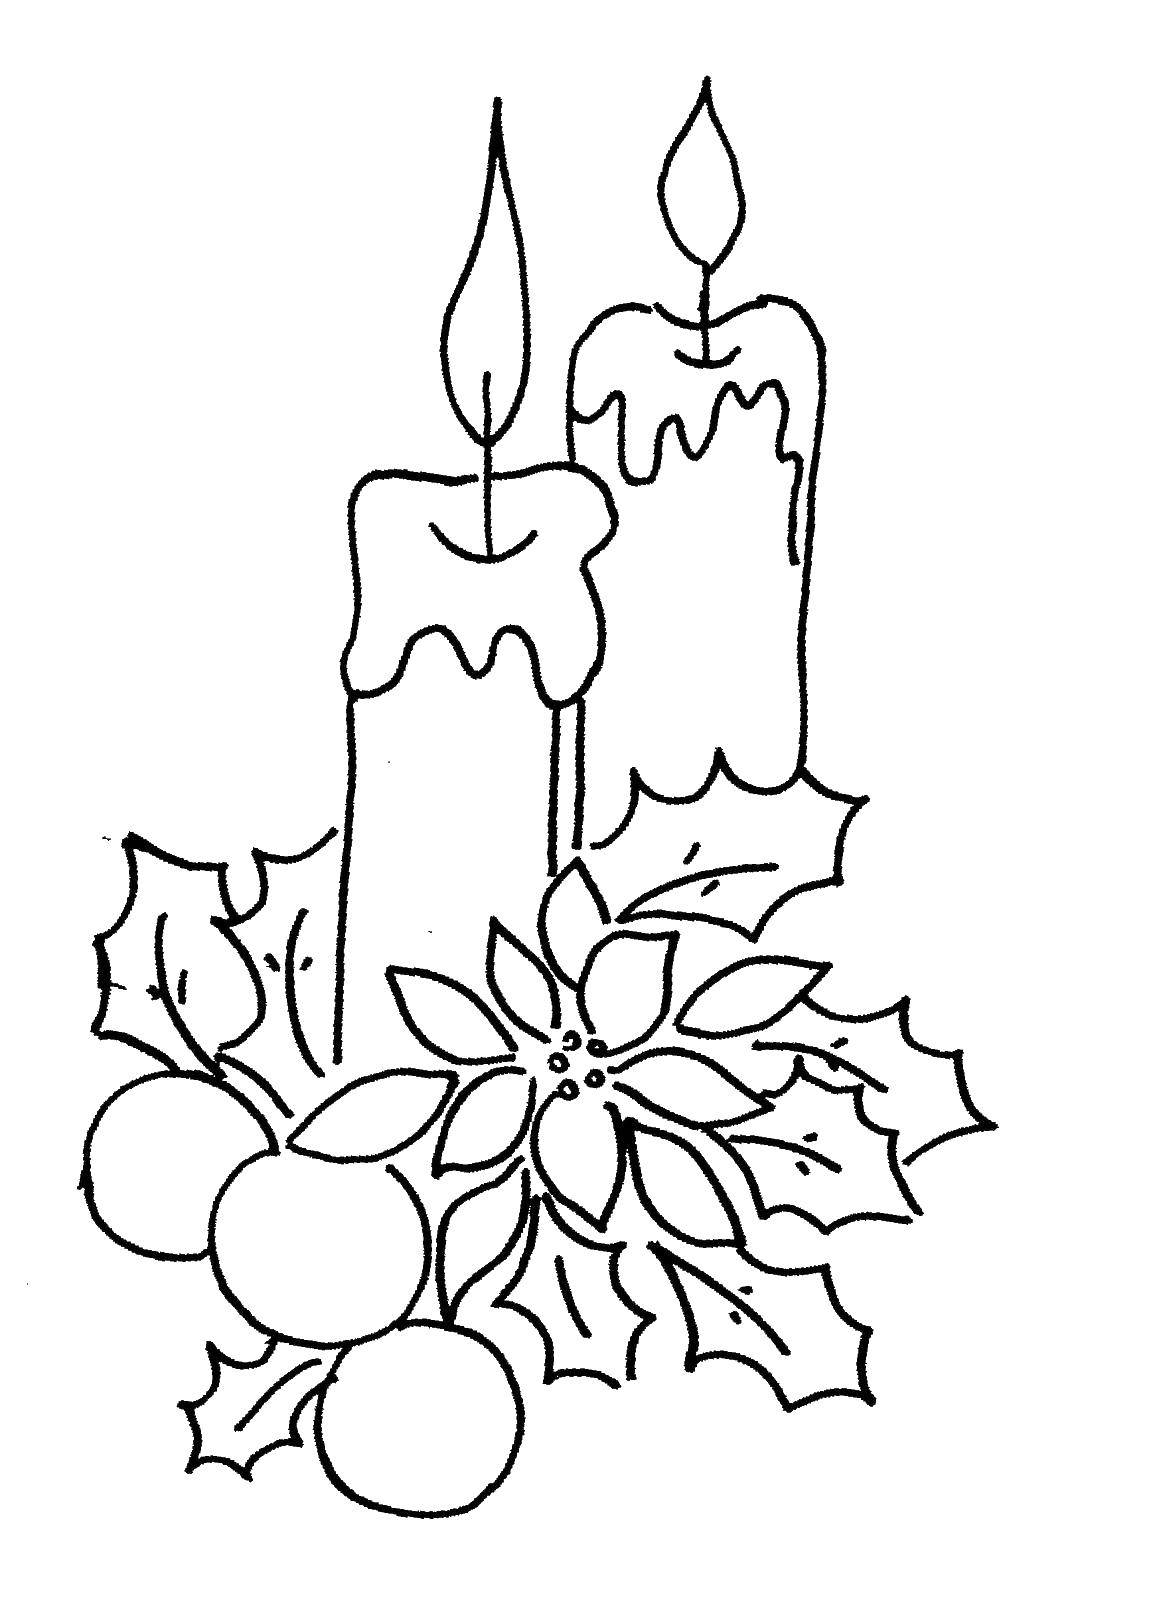 Coloring Christmas candles. Category Christmas. Tags:  candles, Christmas.